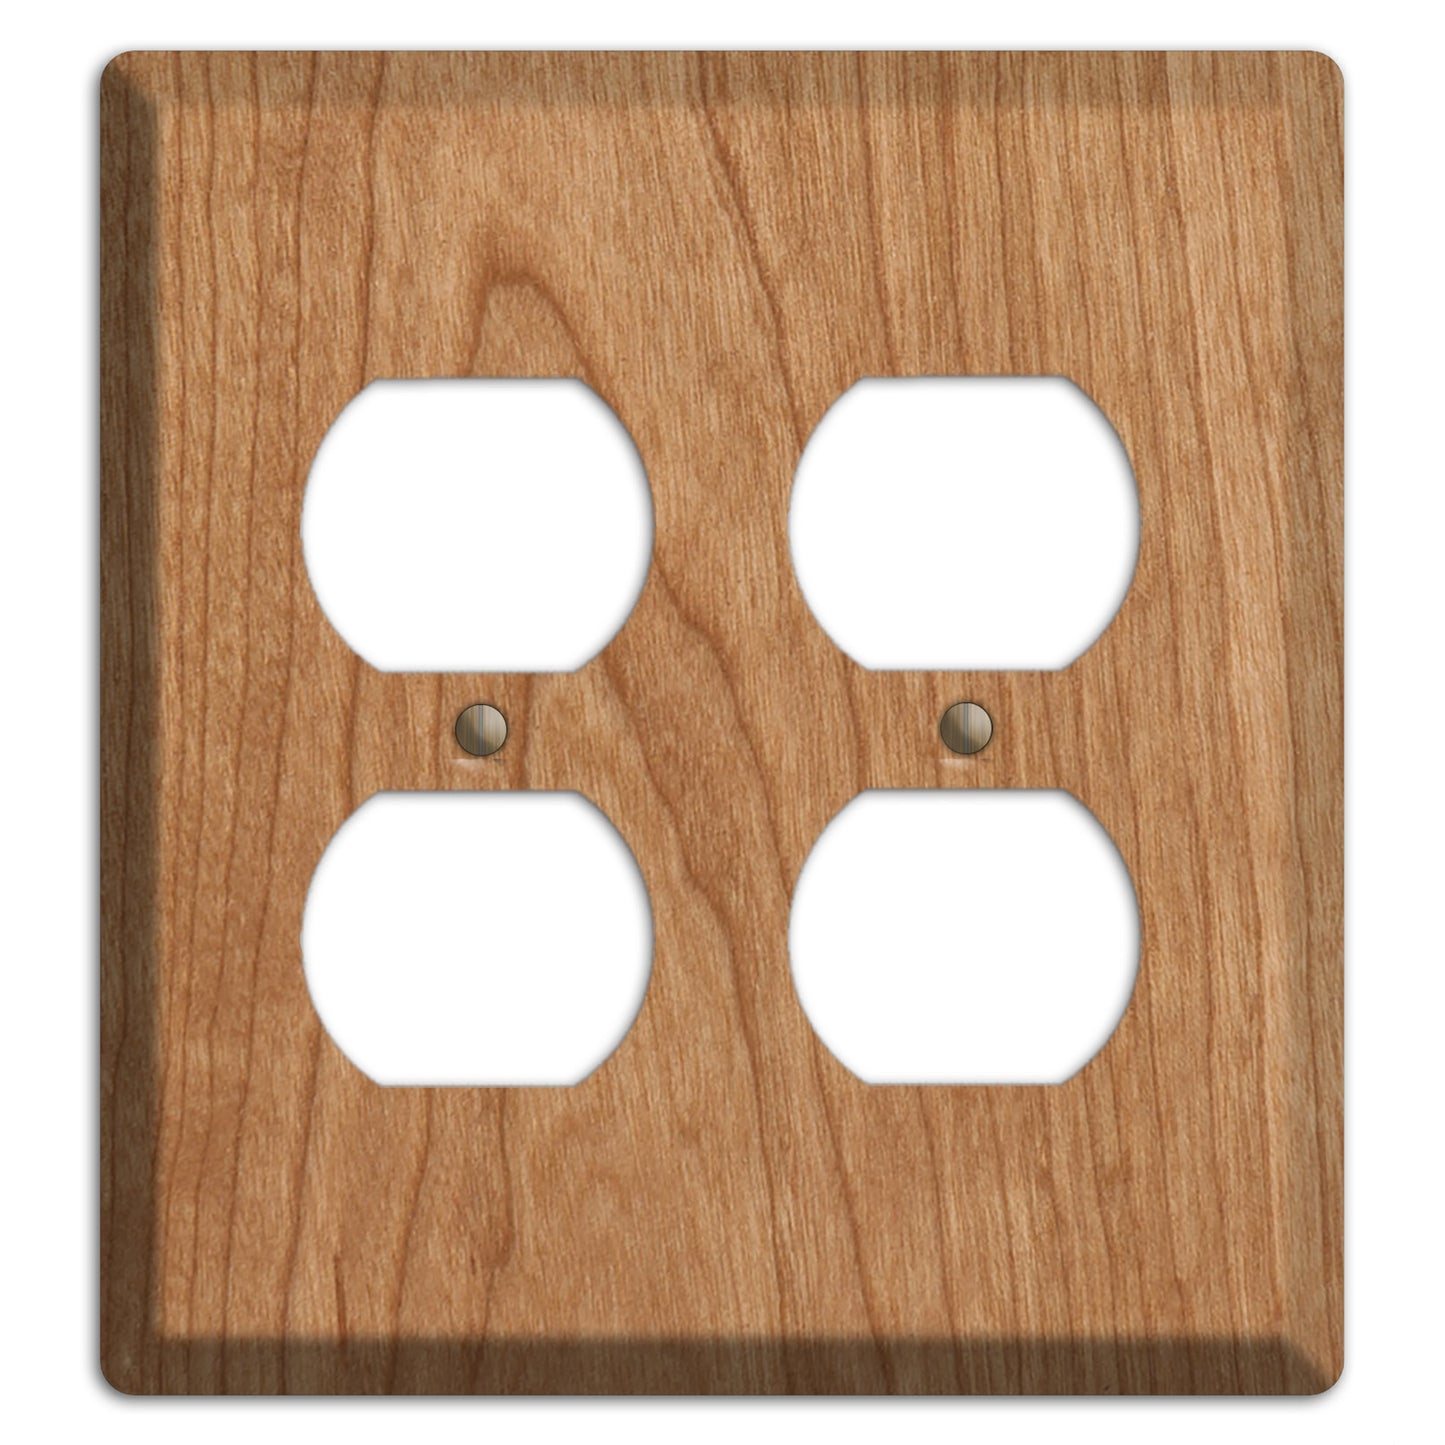 Unfinished Cherry Wood 2 Duplex Outlet Cover Plate